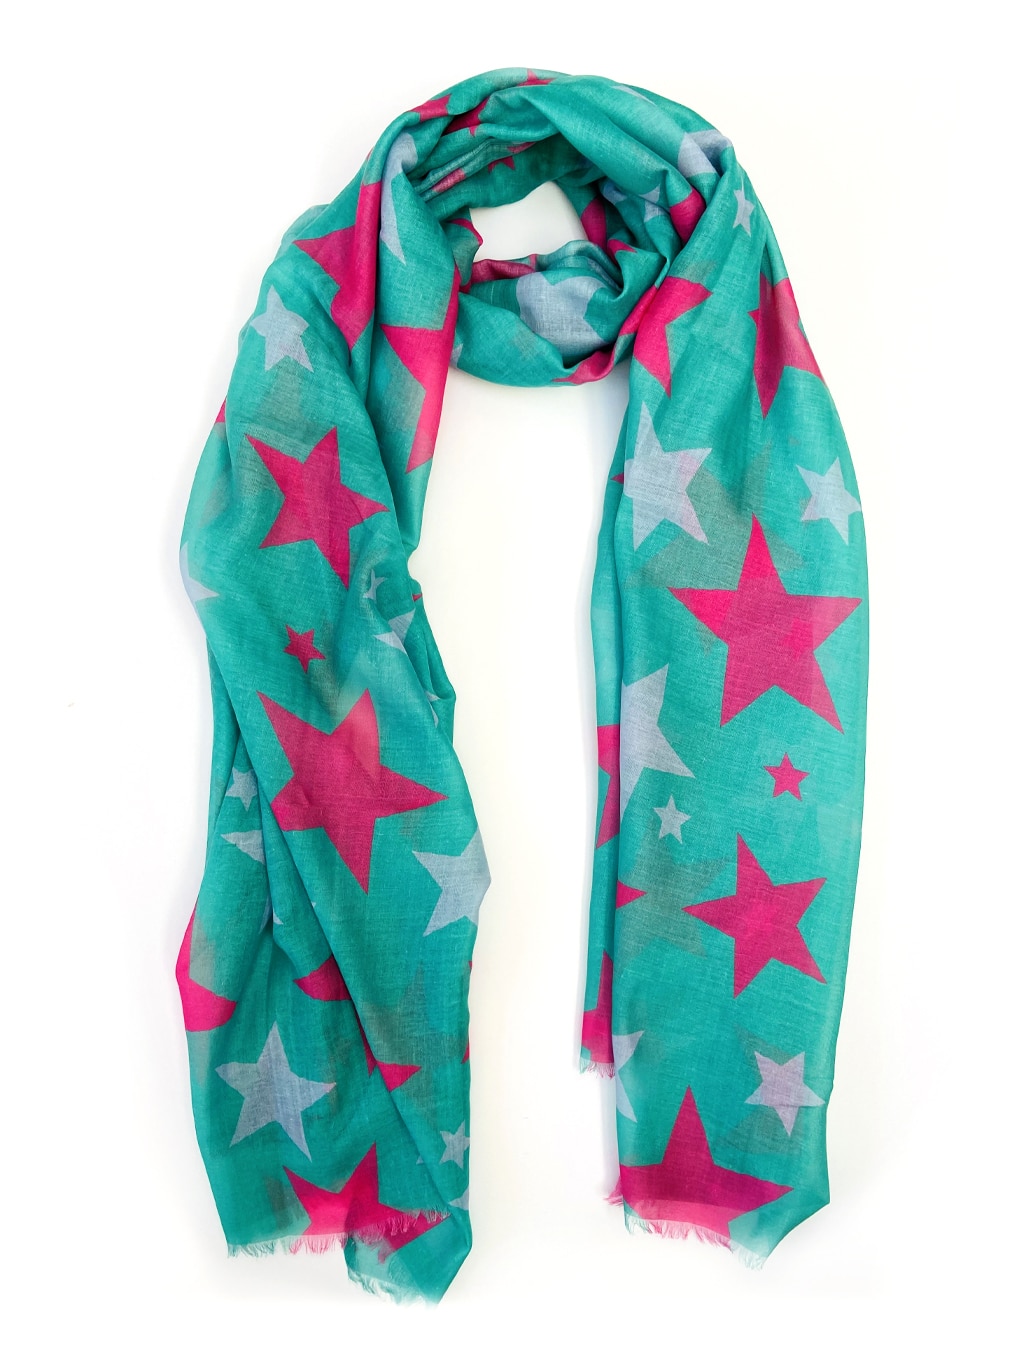 Teal scarf with large pink stars full length